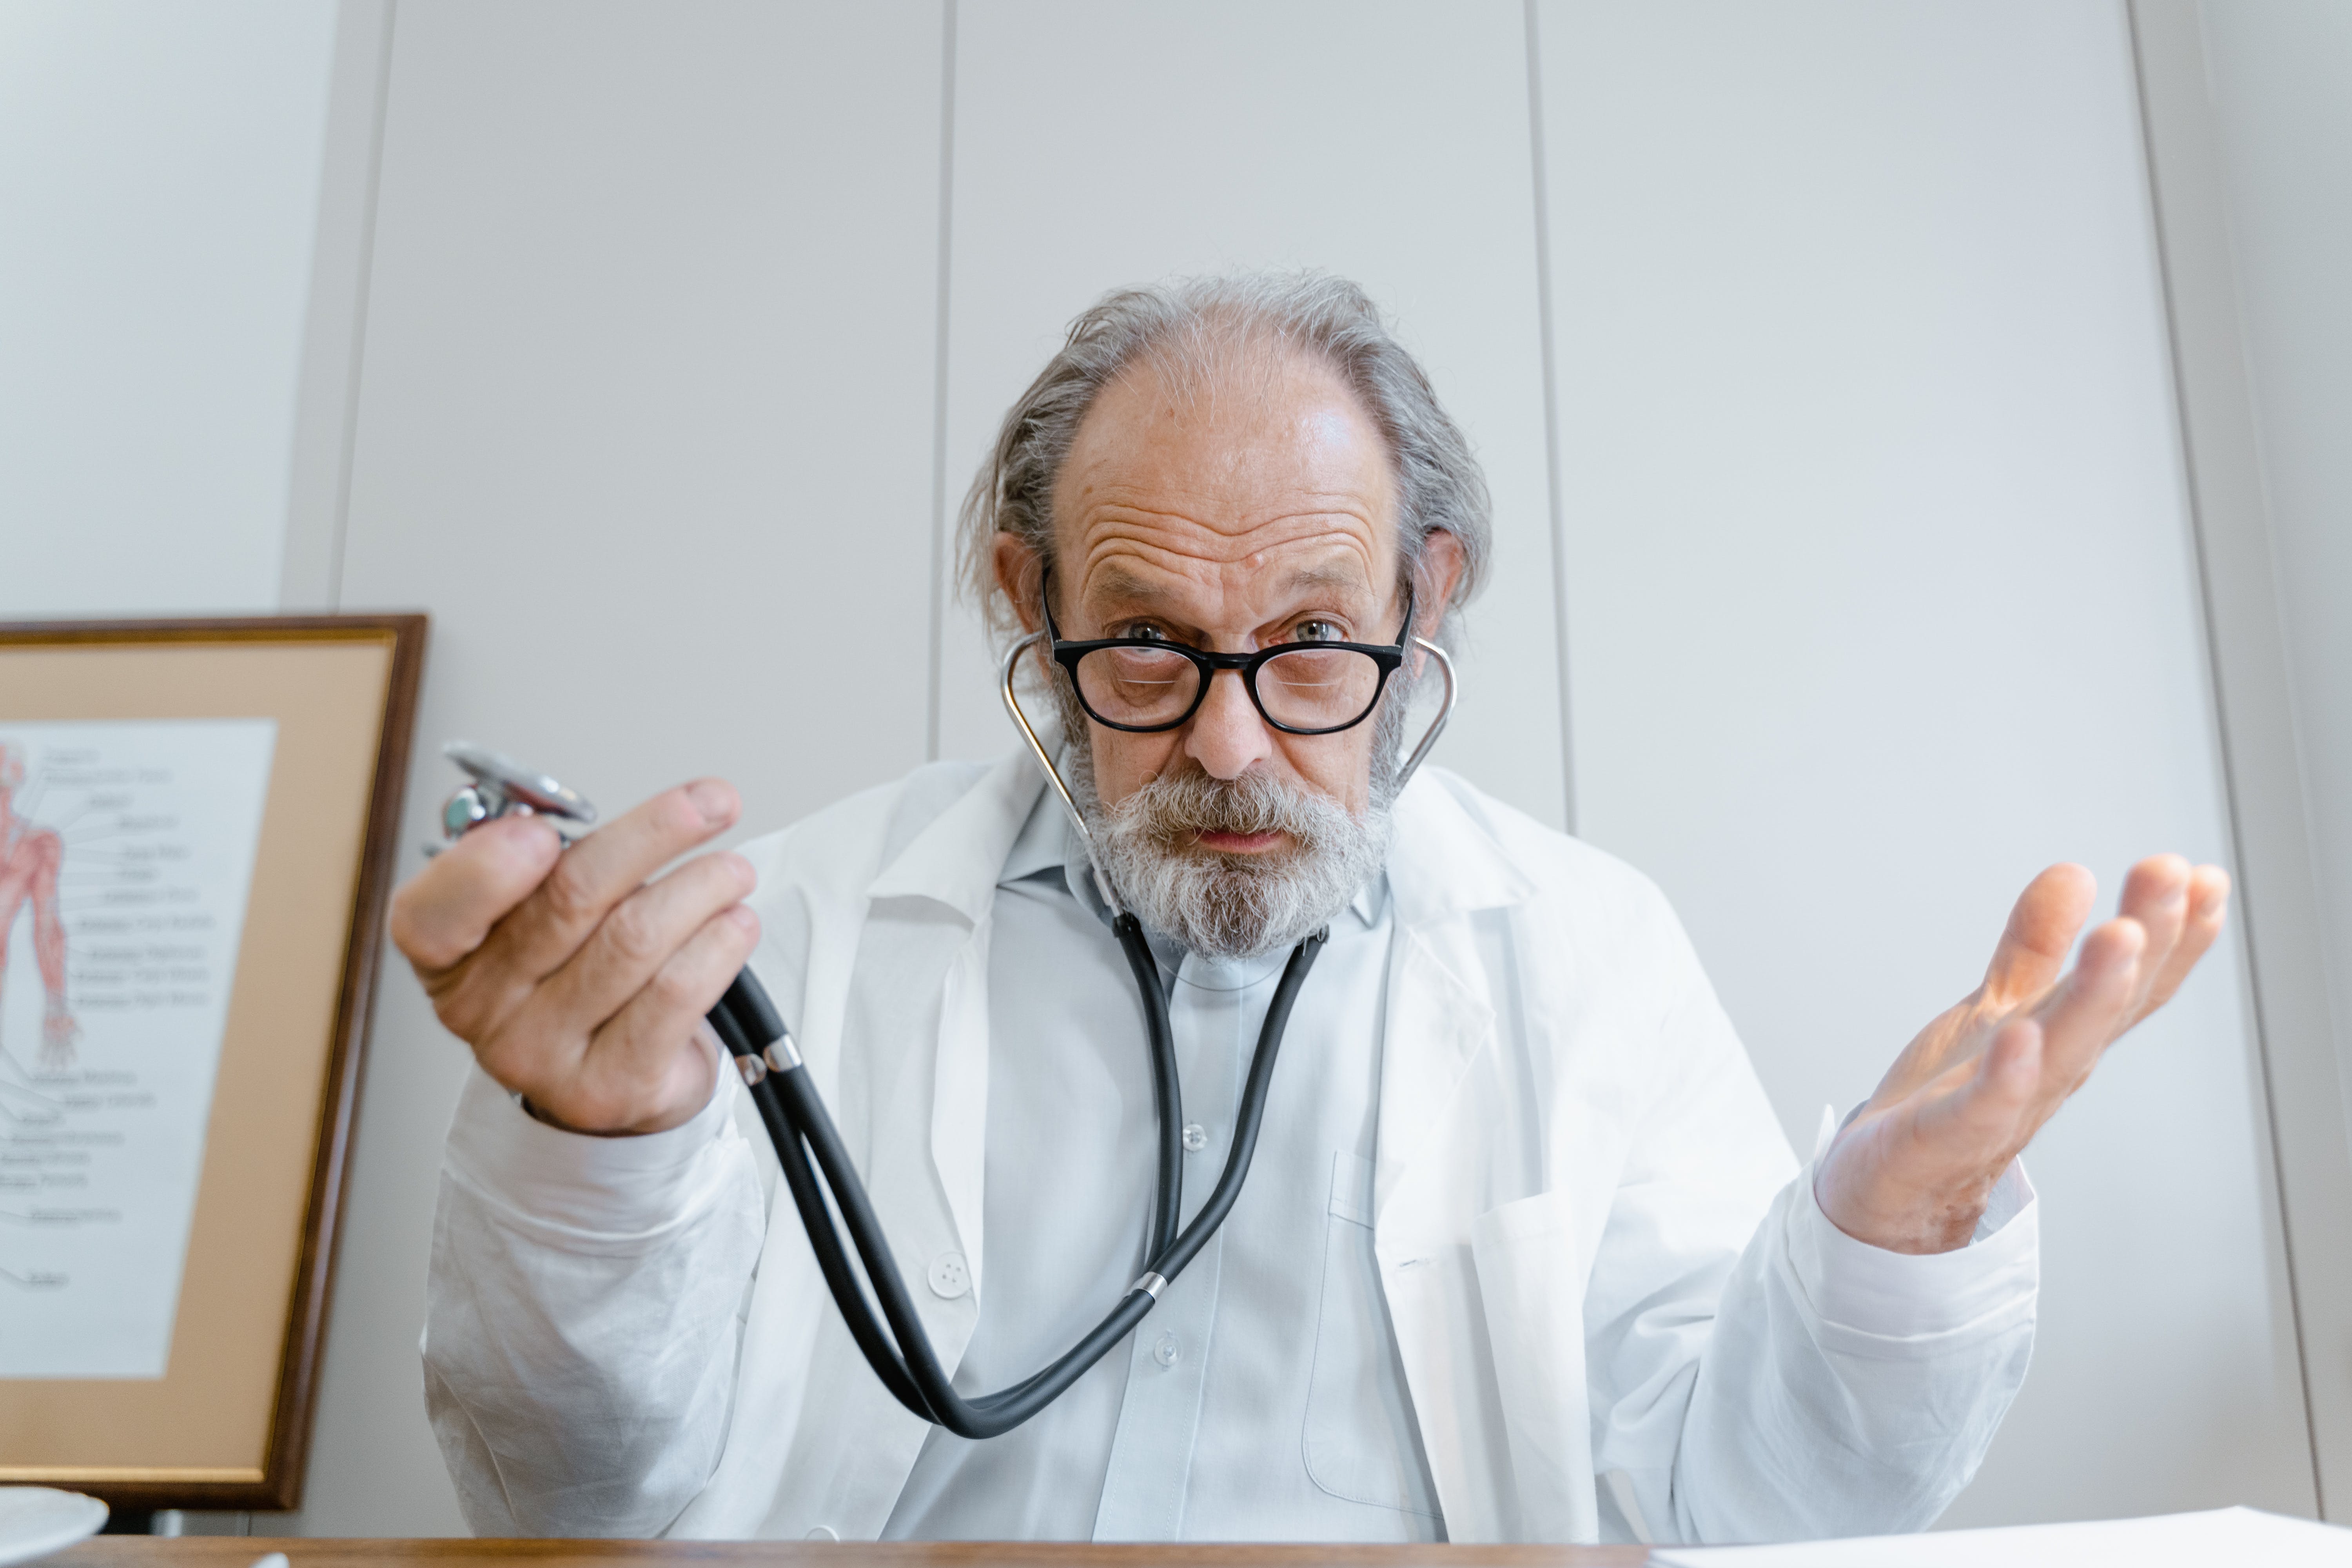 A doctor siting on a table. | Source: Pexels